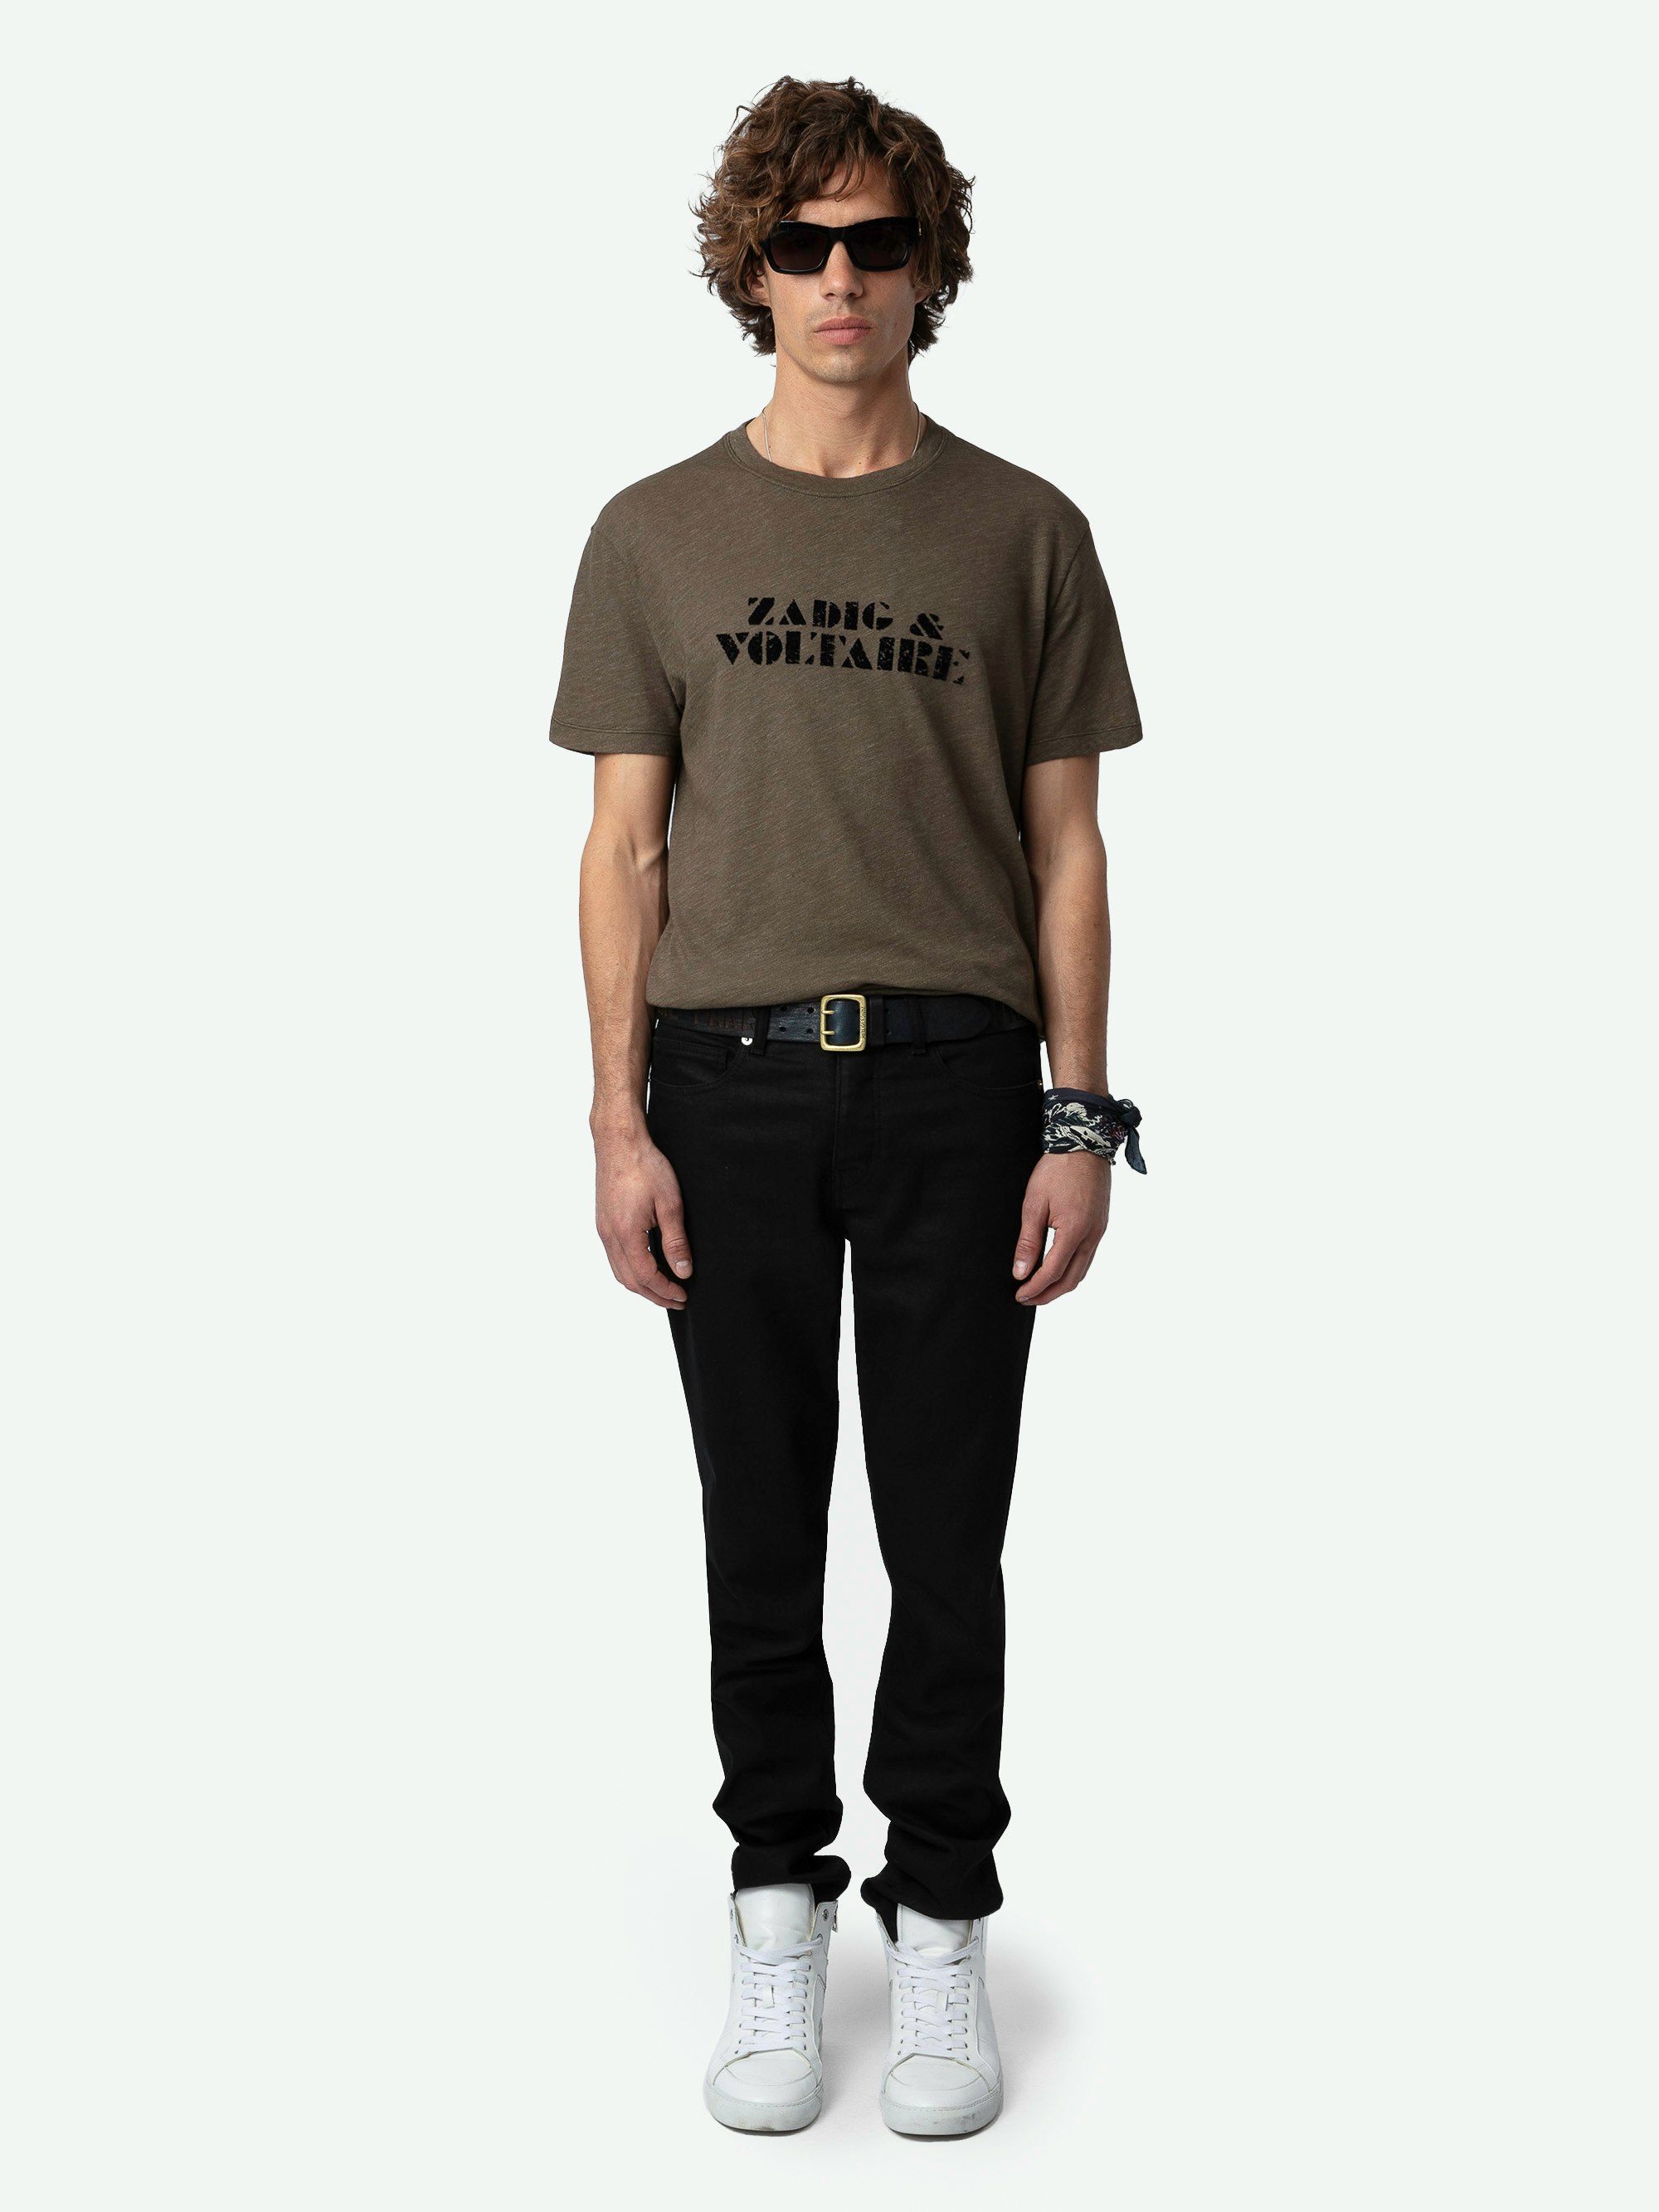 Tommy T-shirt - Short-sleeved brown T-shirt with signature on the front.